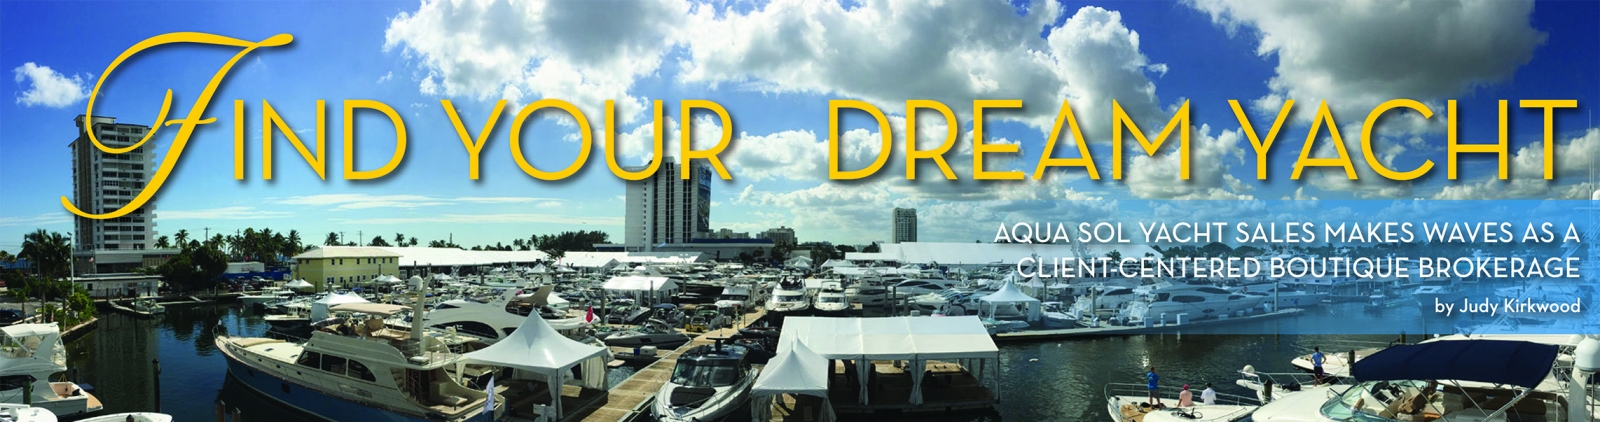 Find your dream yacht - boat show